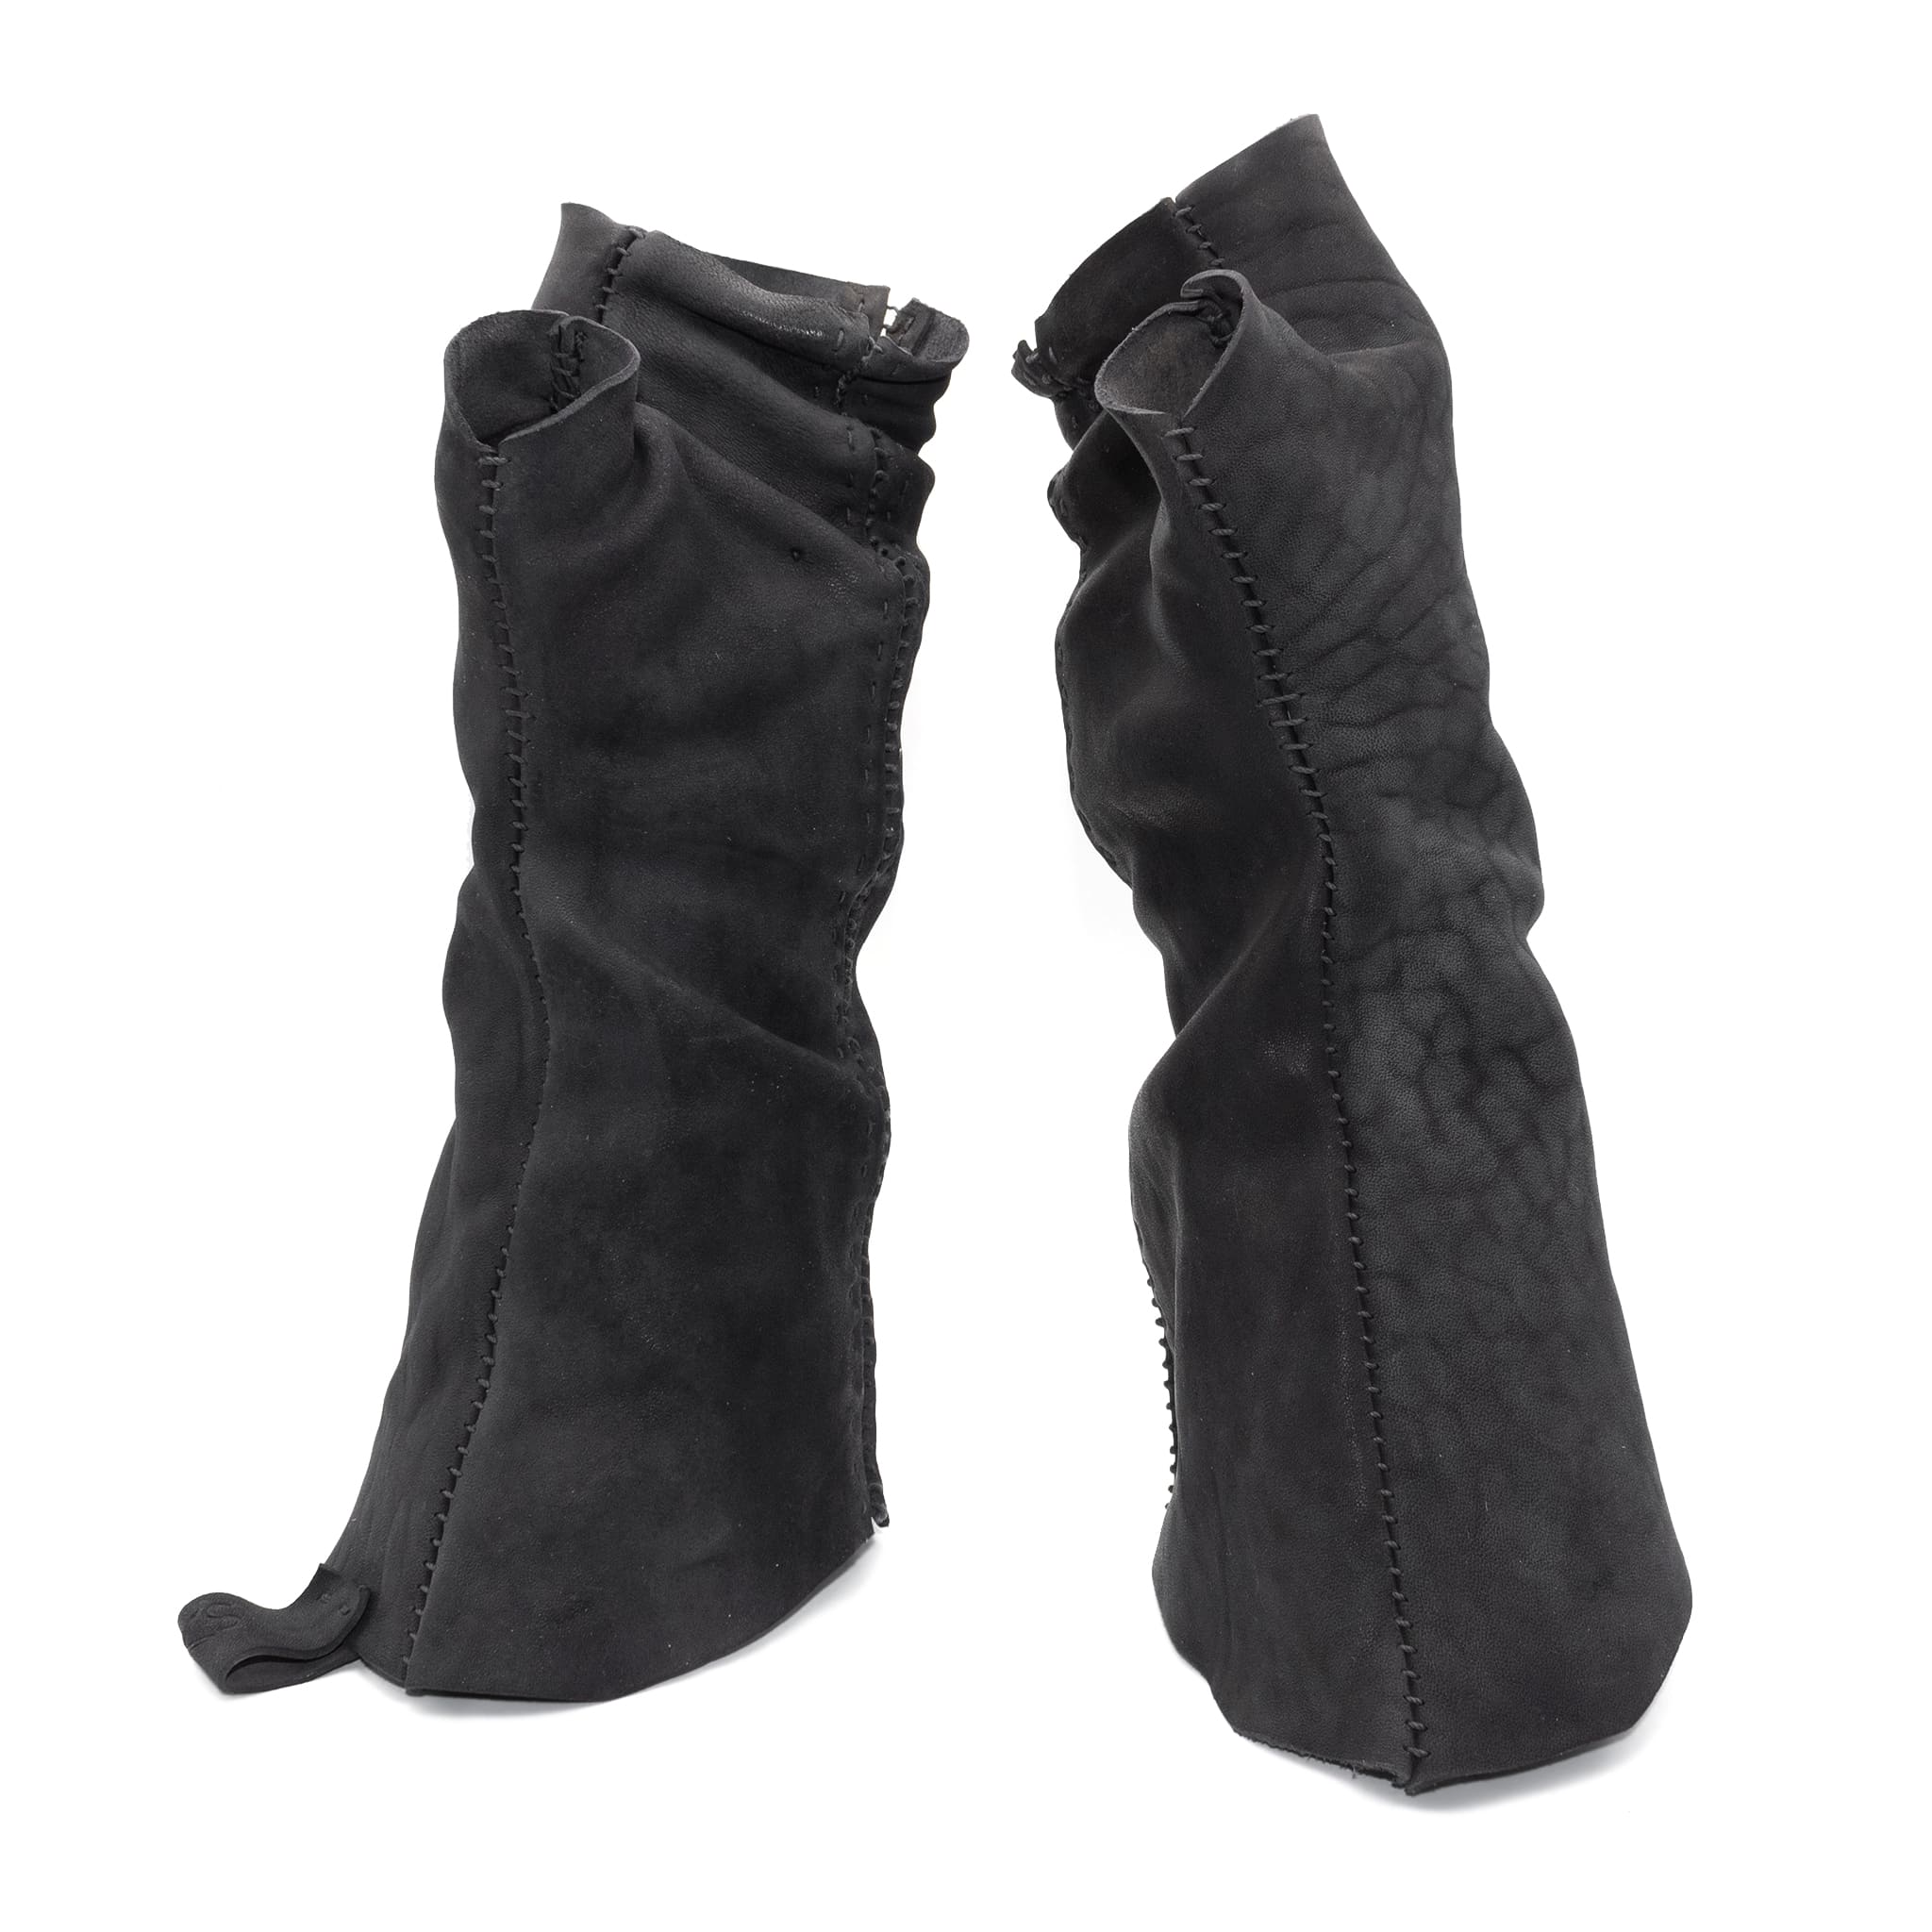 horse culatta open seam long leather gloves available online at atelierskn.com